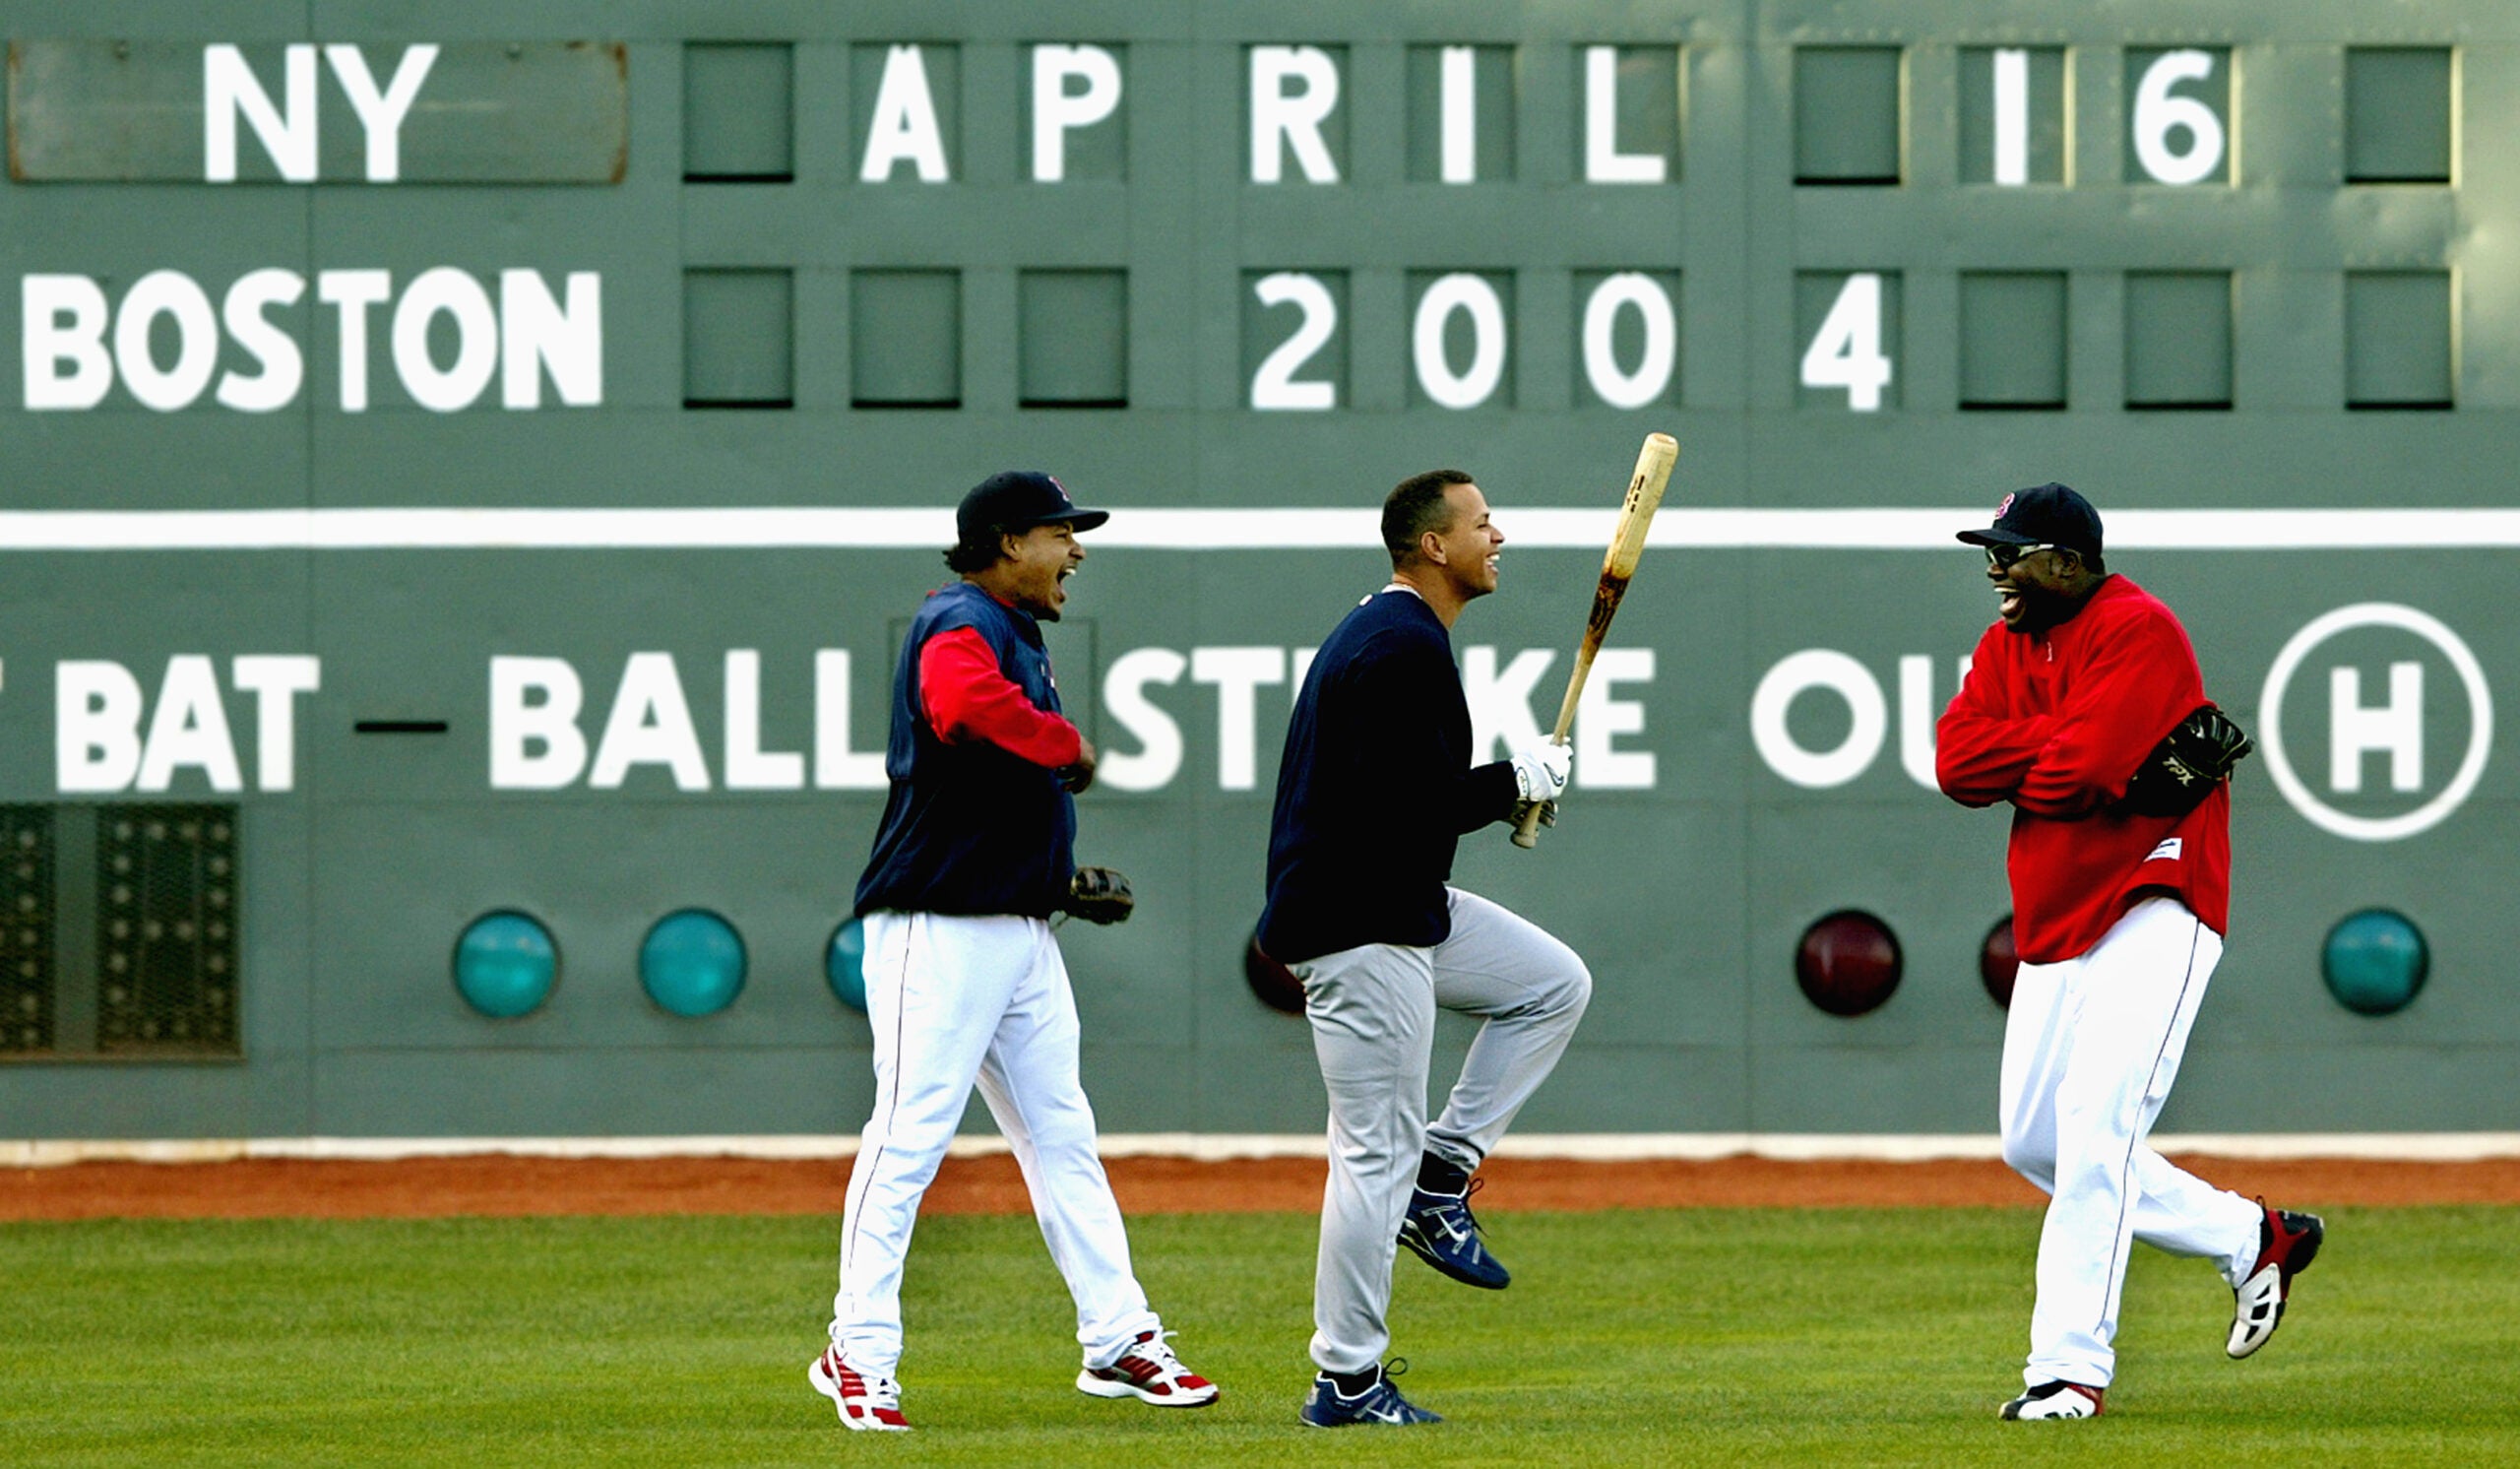 David Ortiz, Alex Rodriguez will be back on Jersey Street after